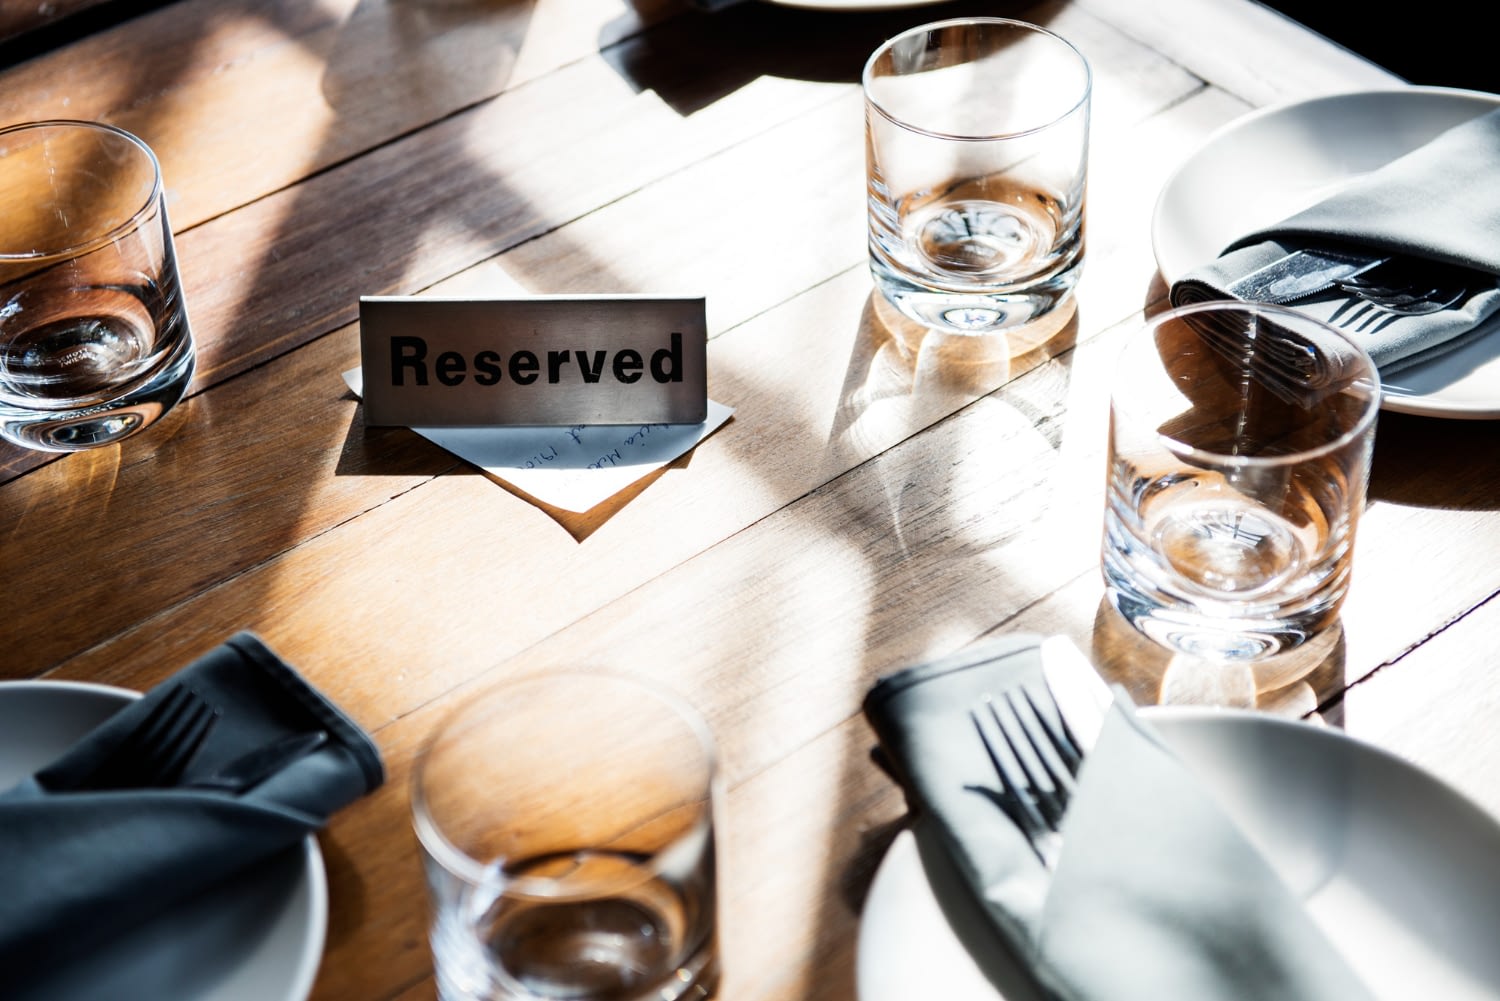 Event Ideas For Restaurants To Boost Sales